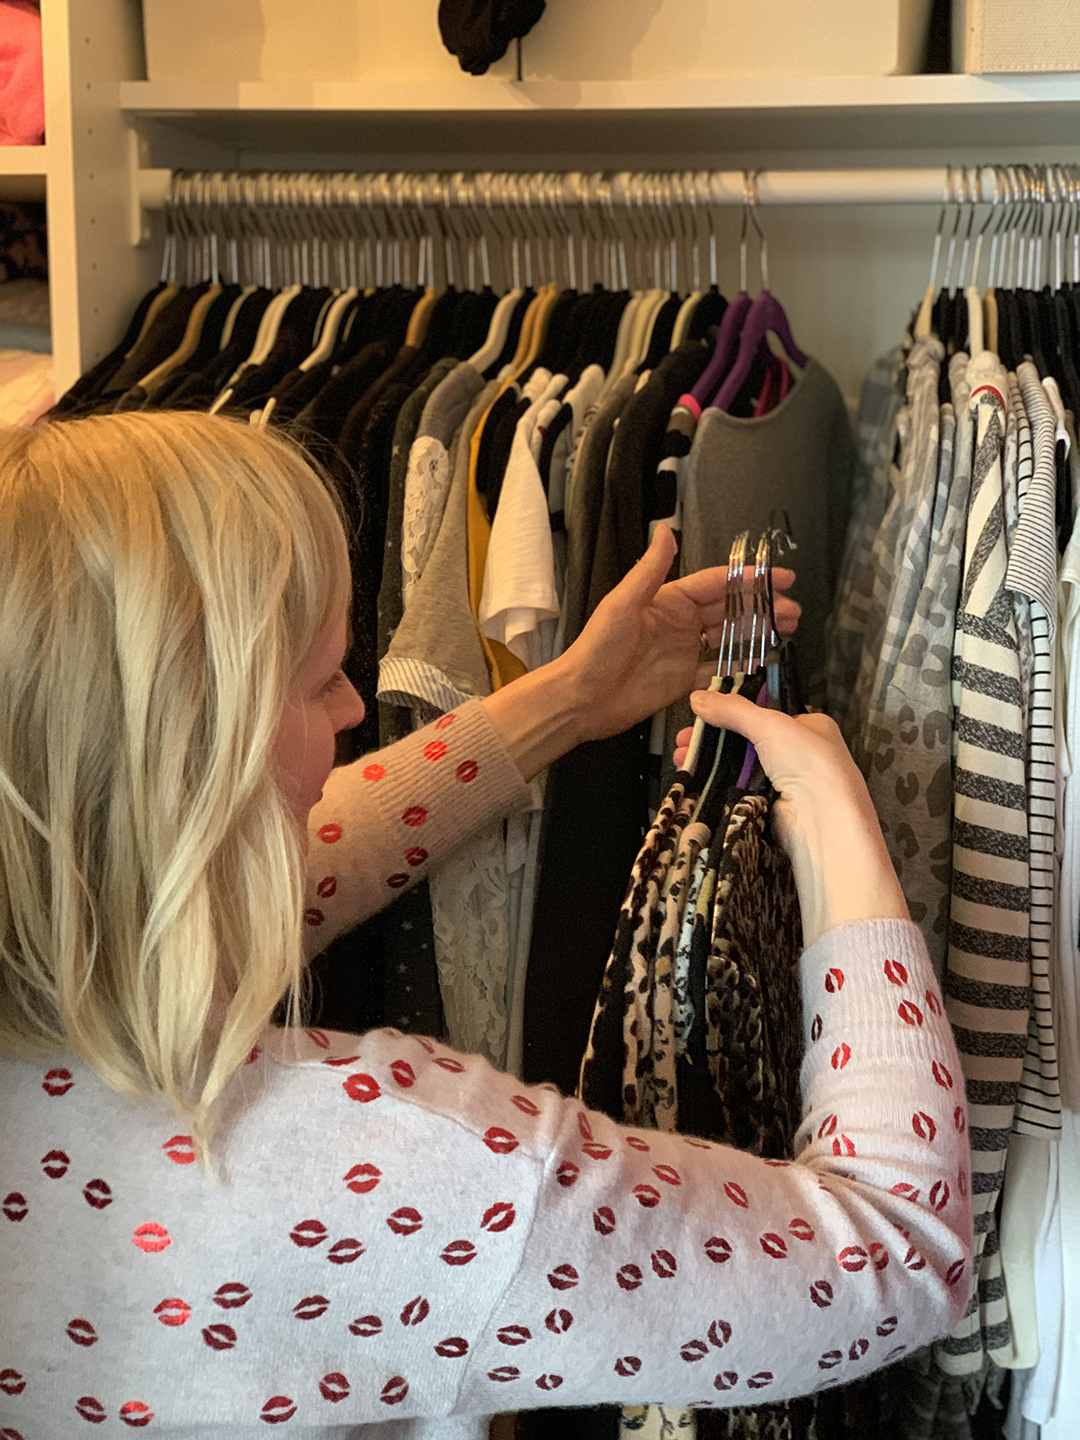 Organizing a closet by color and pattern